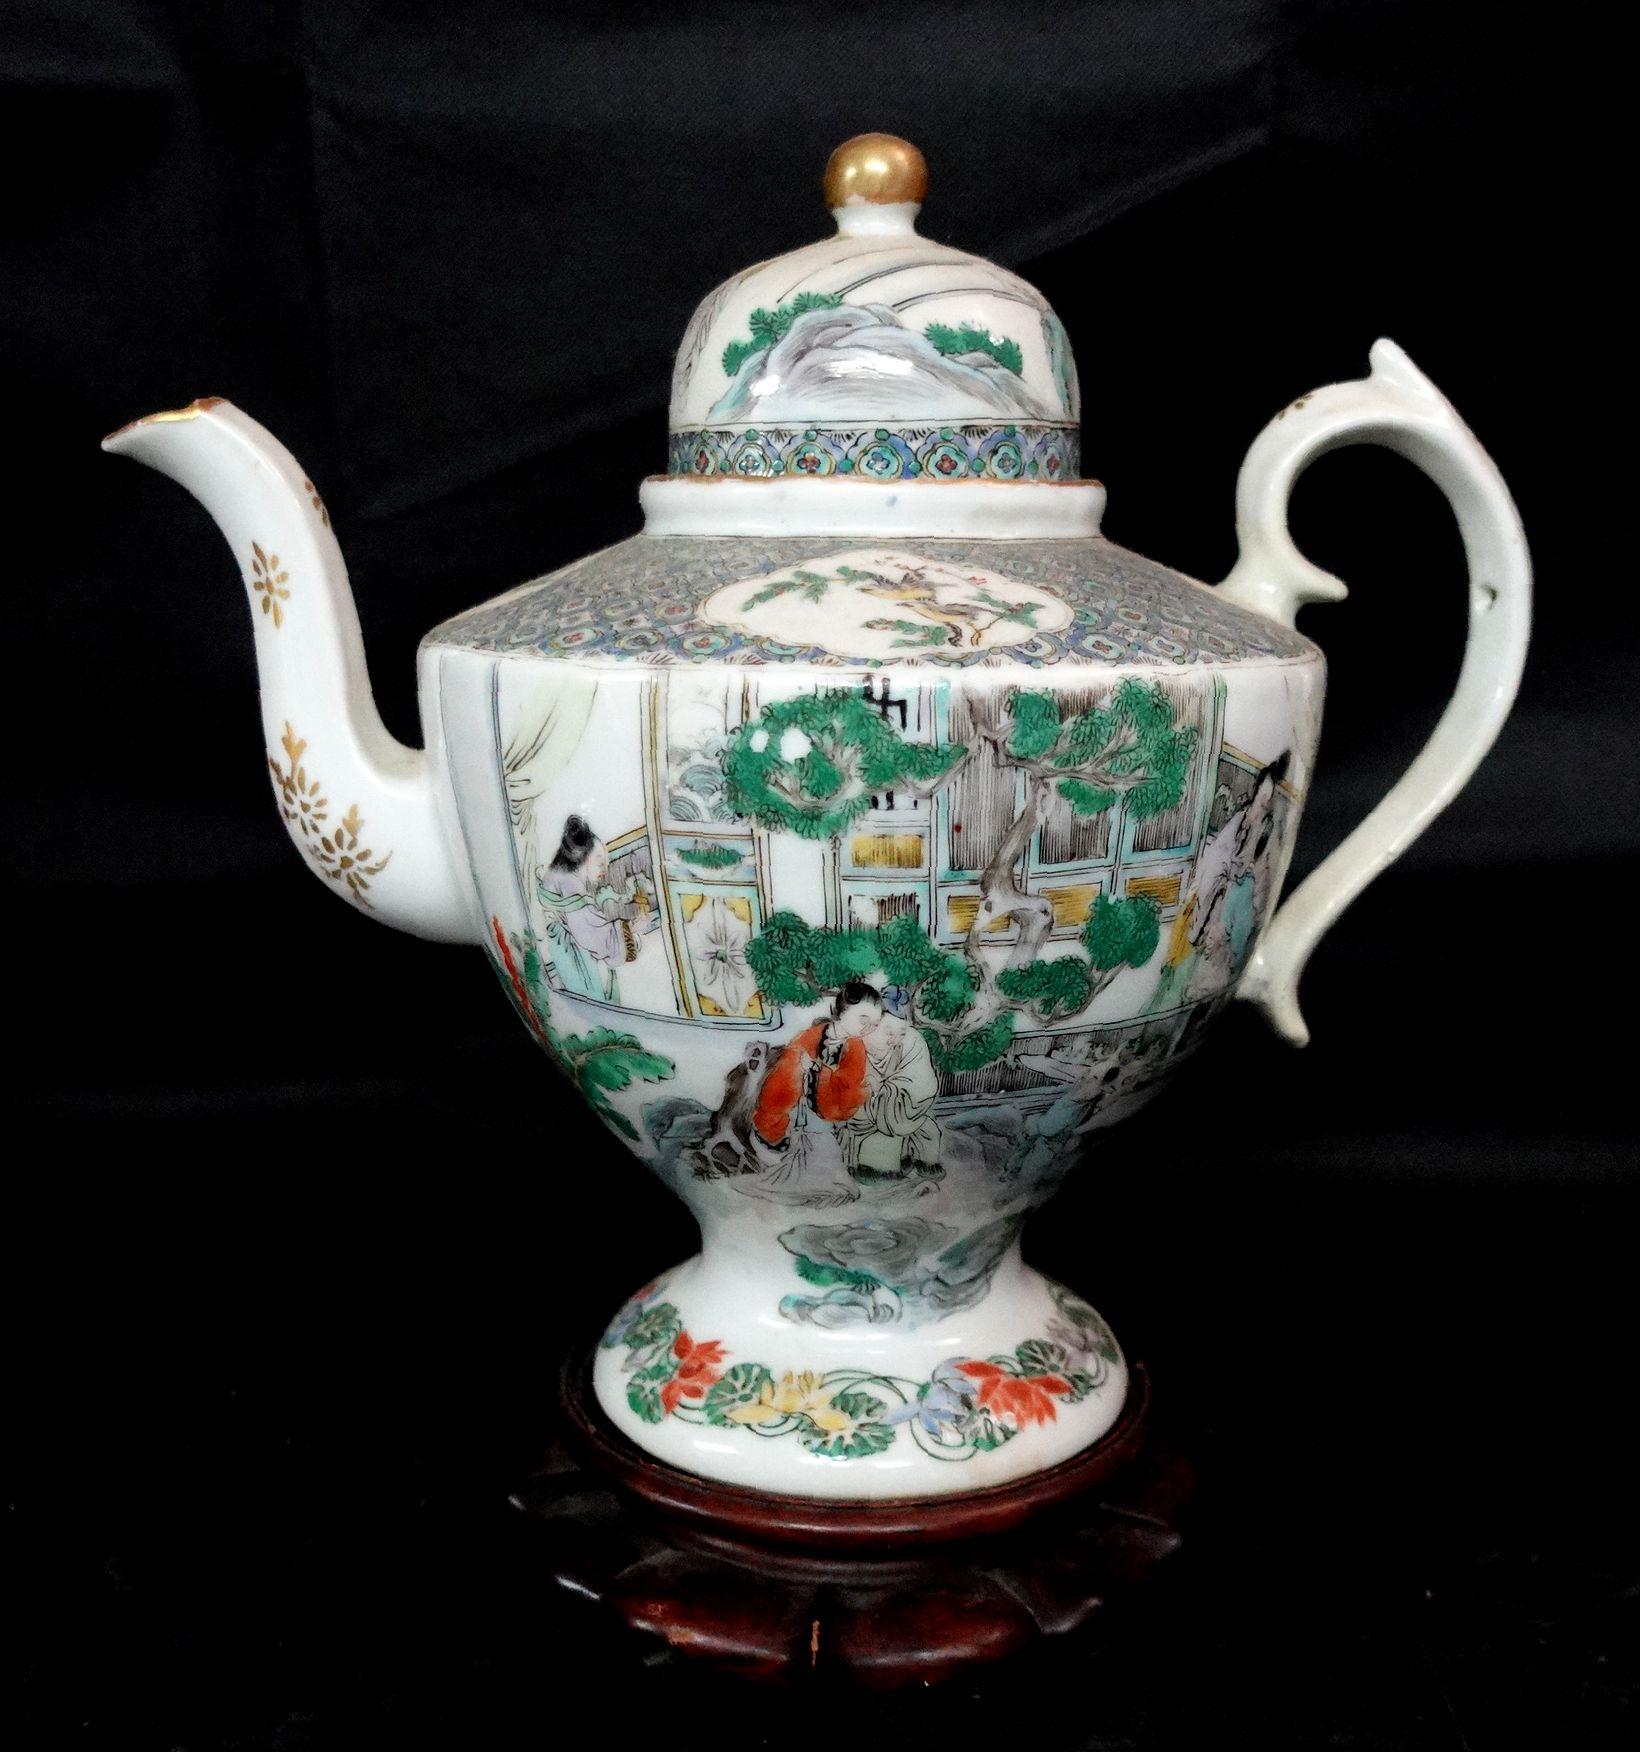 Famille Rose Export Porcelain teapot depicting figures, flowers, and birds, depicting the living style in a traditional Chinese garden villa in the early 19th century, hardwood stand included. Ric061.

  